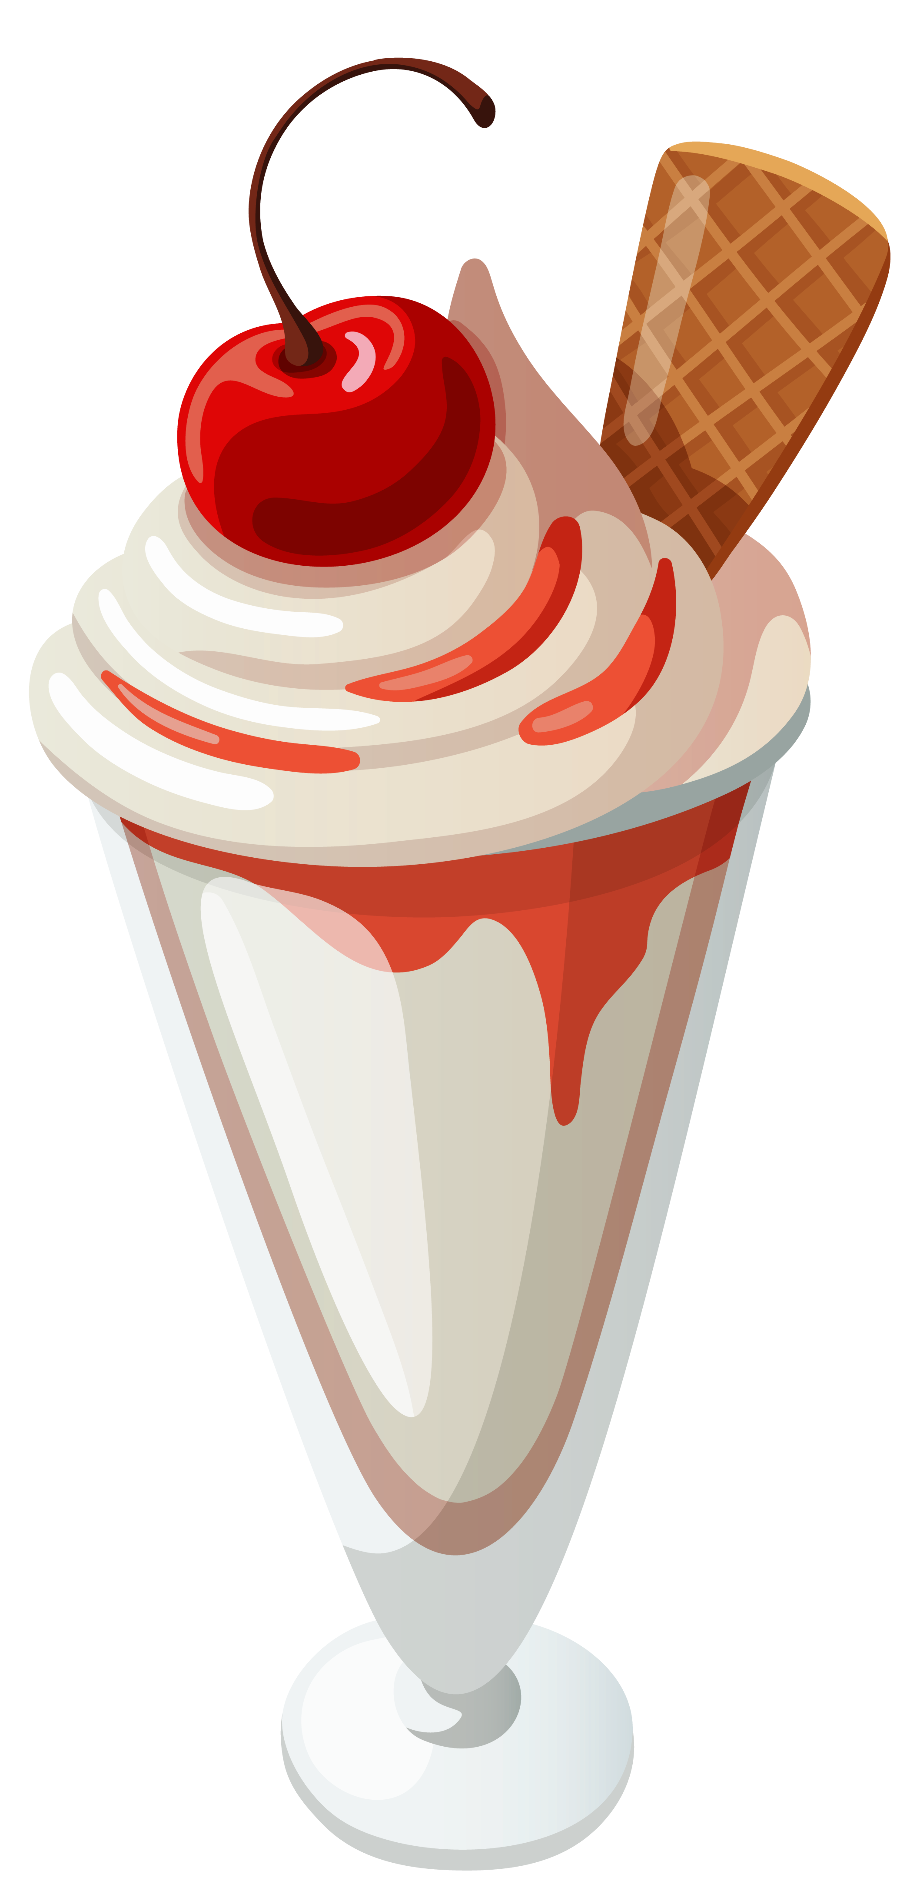 Download High Quality ice cream sundae clipart transparent background